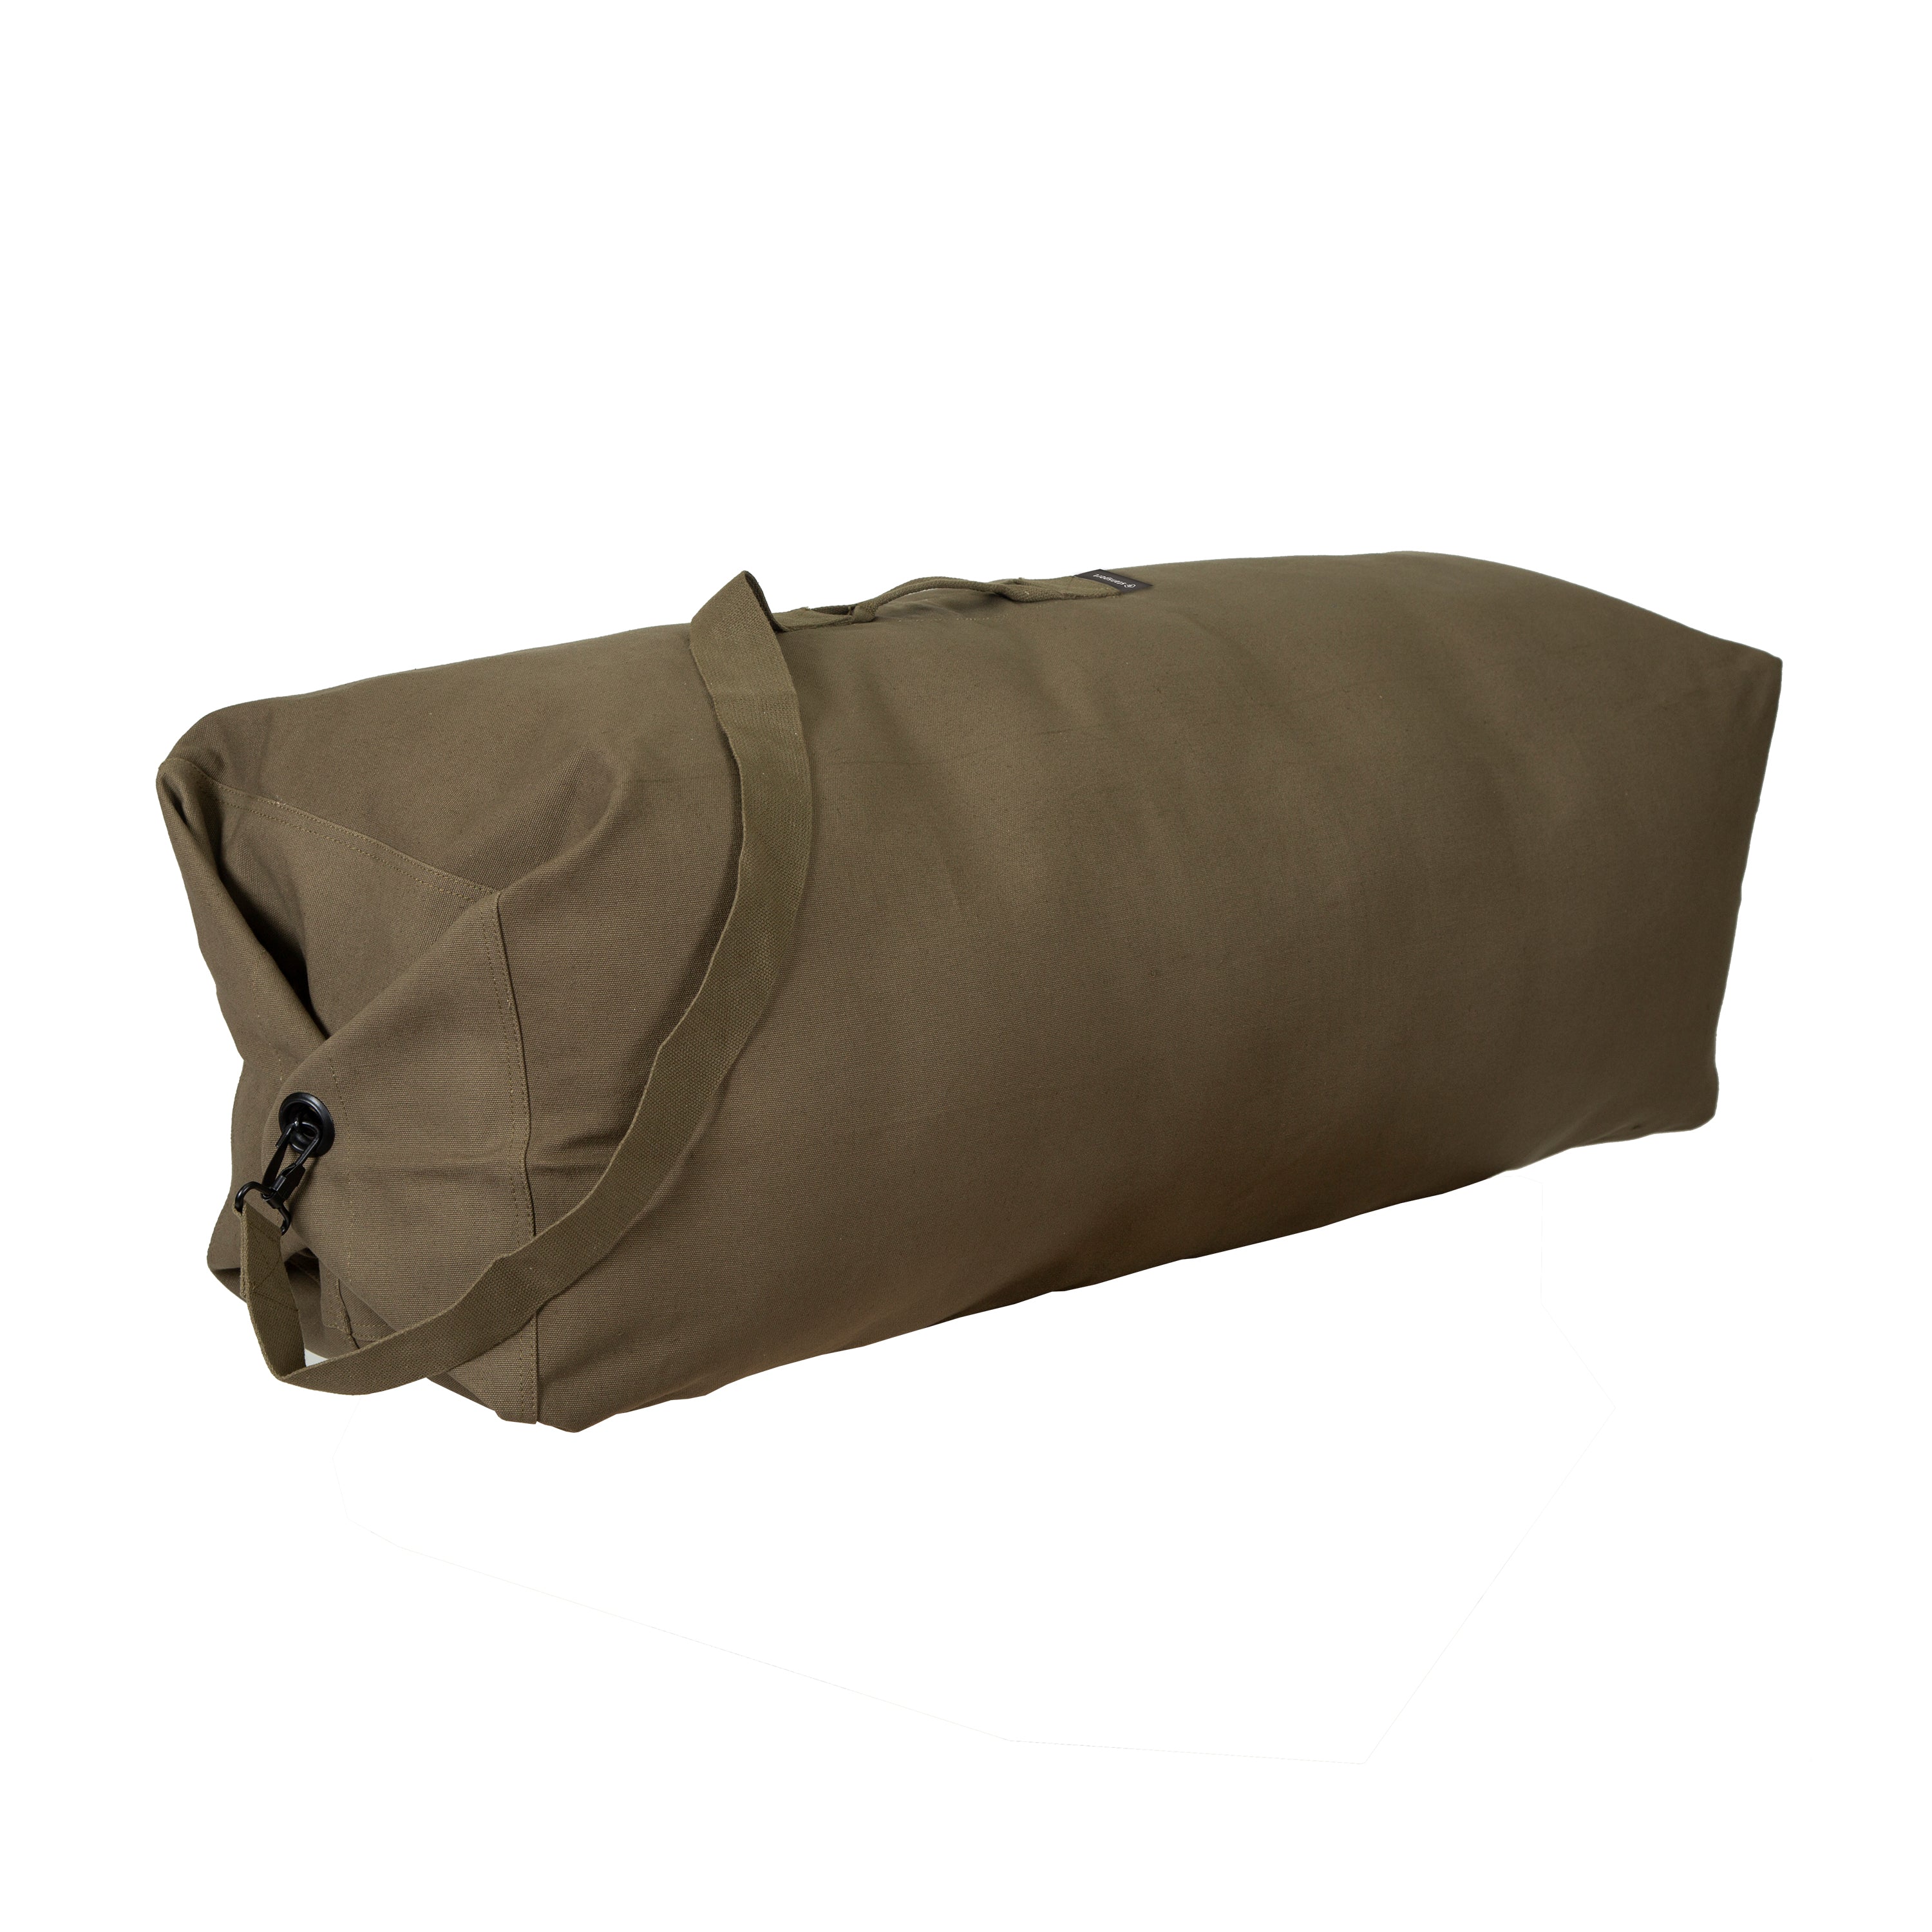 Duffel Bag With Strap - O.D. - 50 In X 14.5 In X 14.5 In